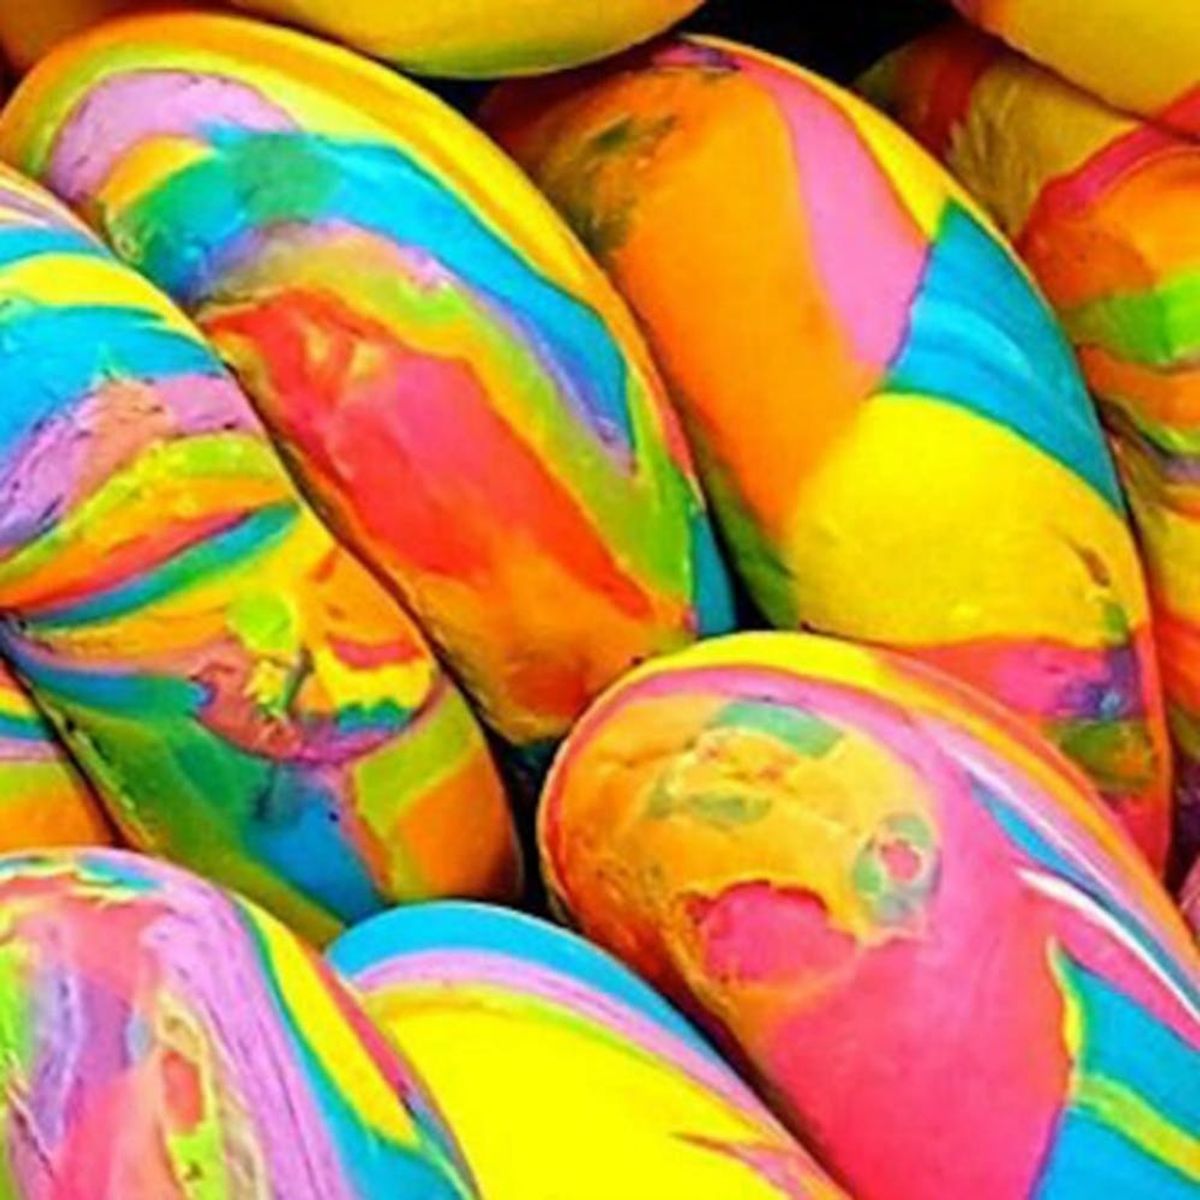 Rainbow Bagels Have a Colorful History